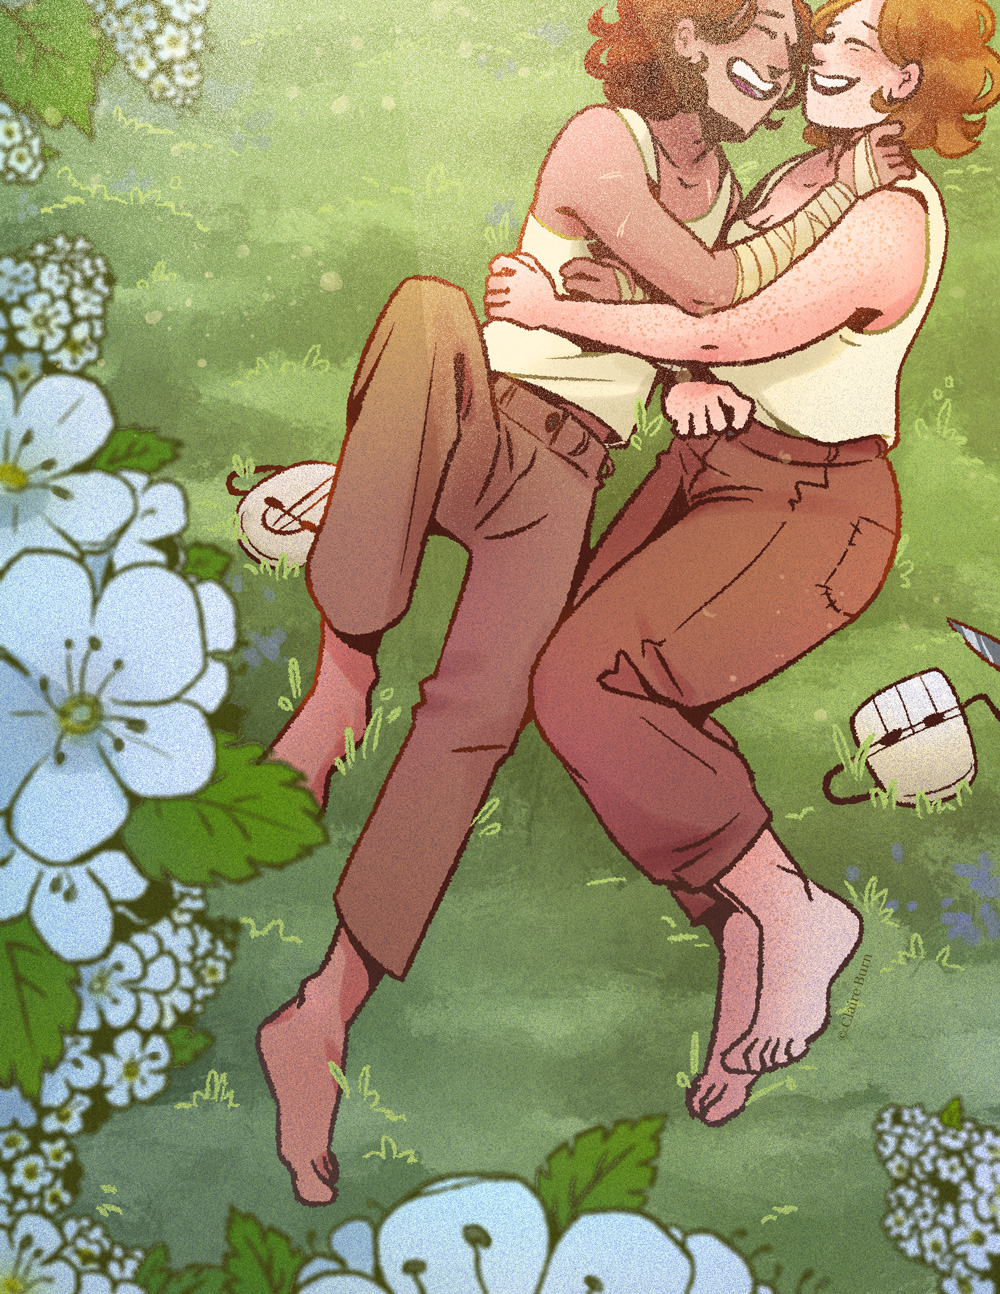 A girl and a boy laying in the grass, embracing and laughing. A blooming hawthorn tree is in the foreground.